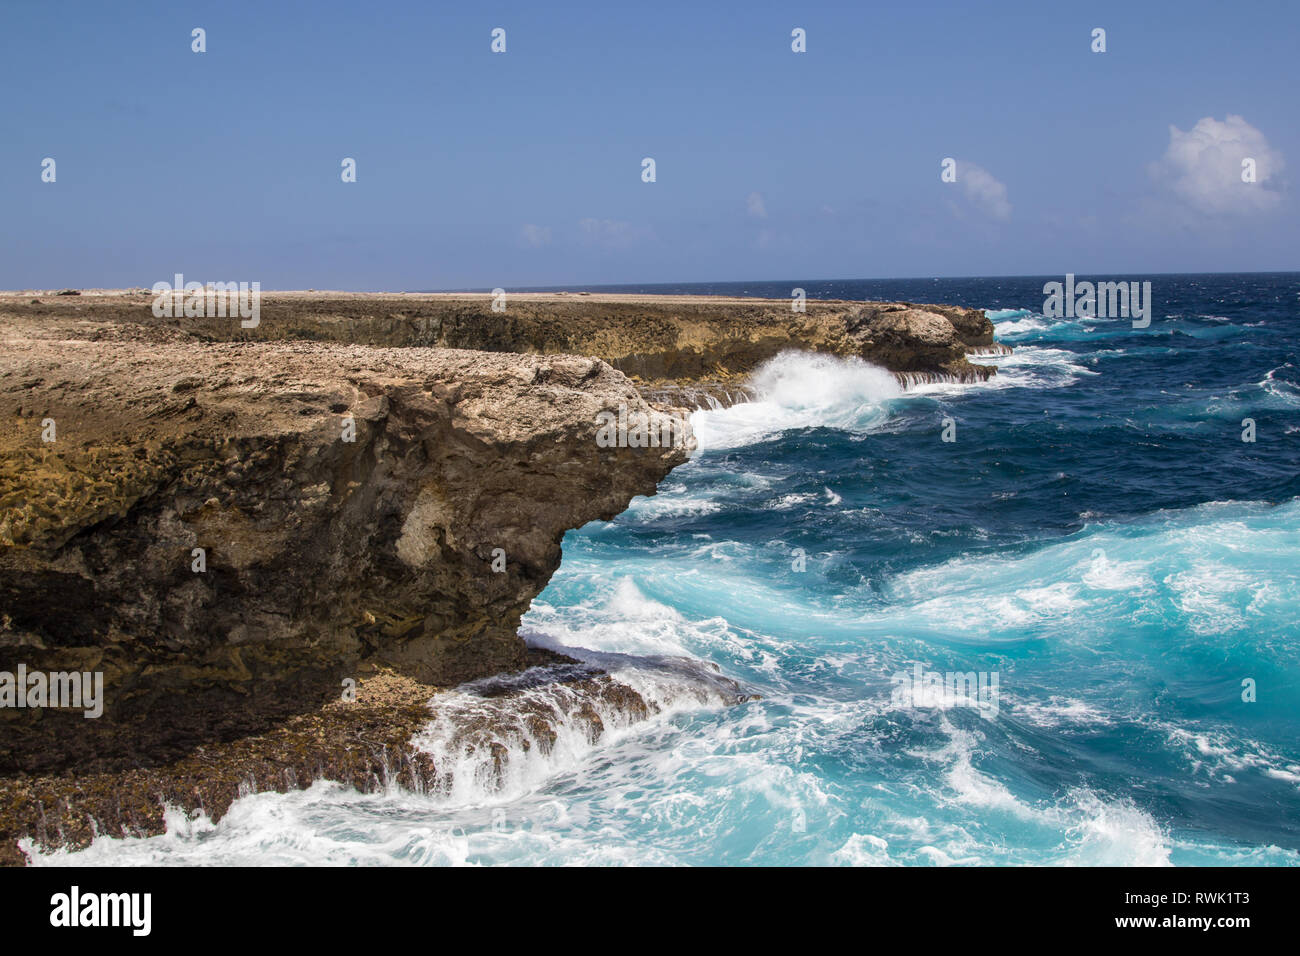 Wild and high waves crashing at the rough cliffs of the east coast of the tropical island Bonaire Stock Photo